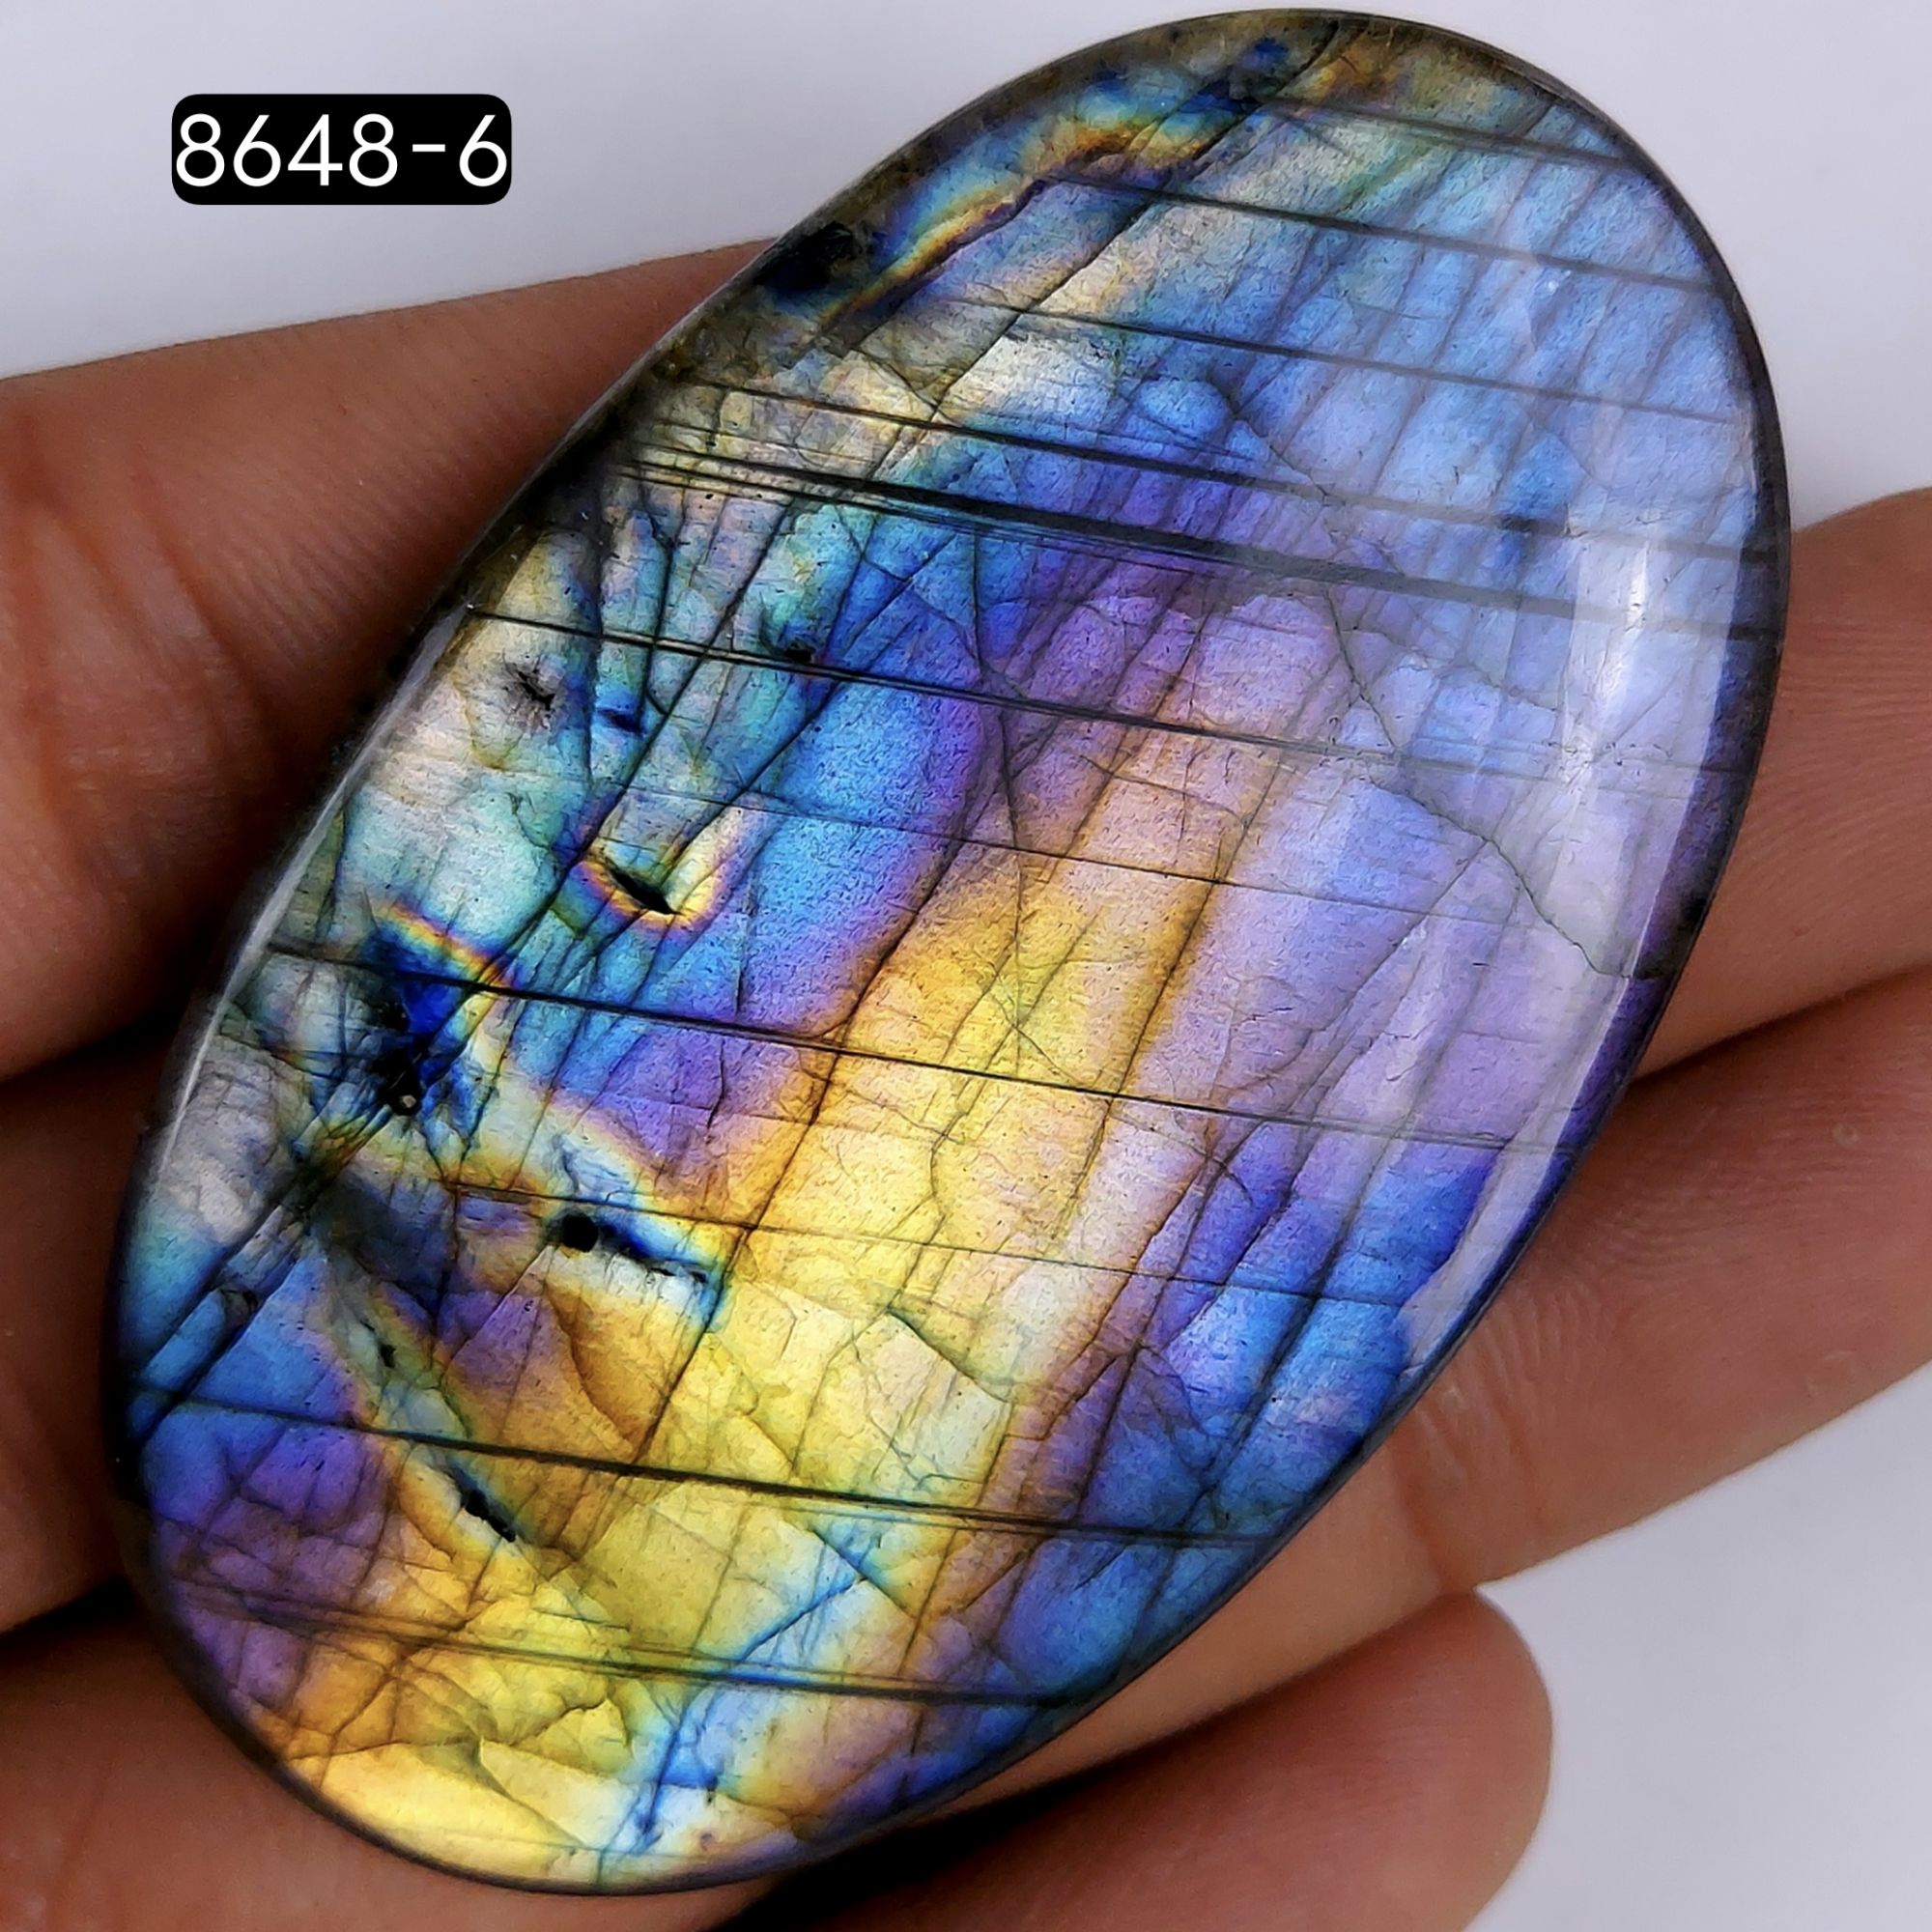 1Pcs 177Cts Natural Multi Fire Labradorite Oval Shape Cabochon Loose Gemstone Lot For Jewelry Making 65x38mm #8648-6